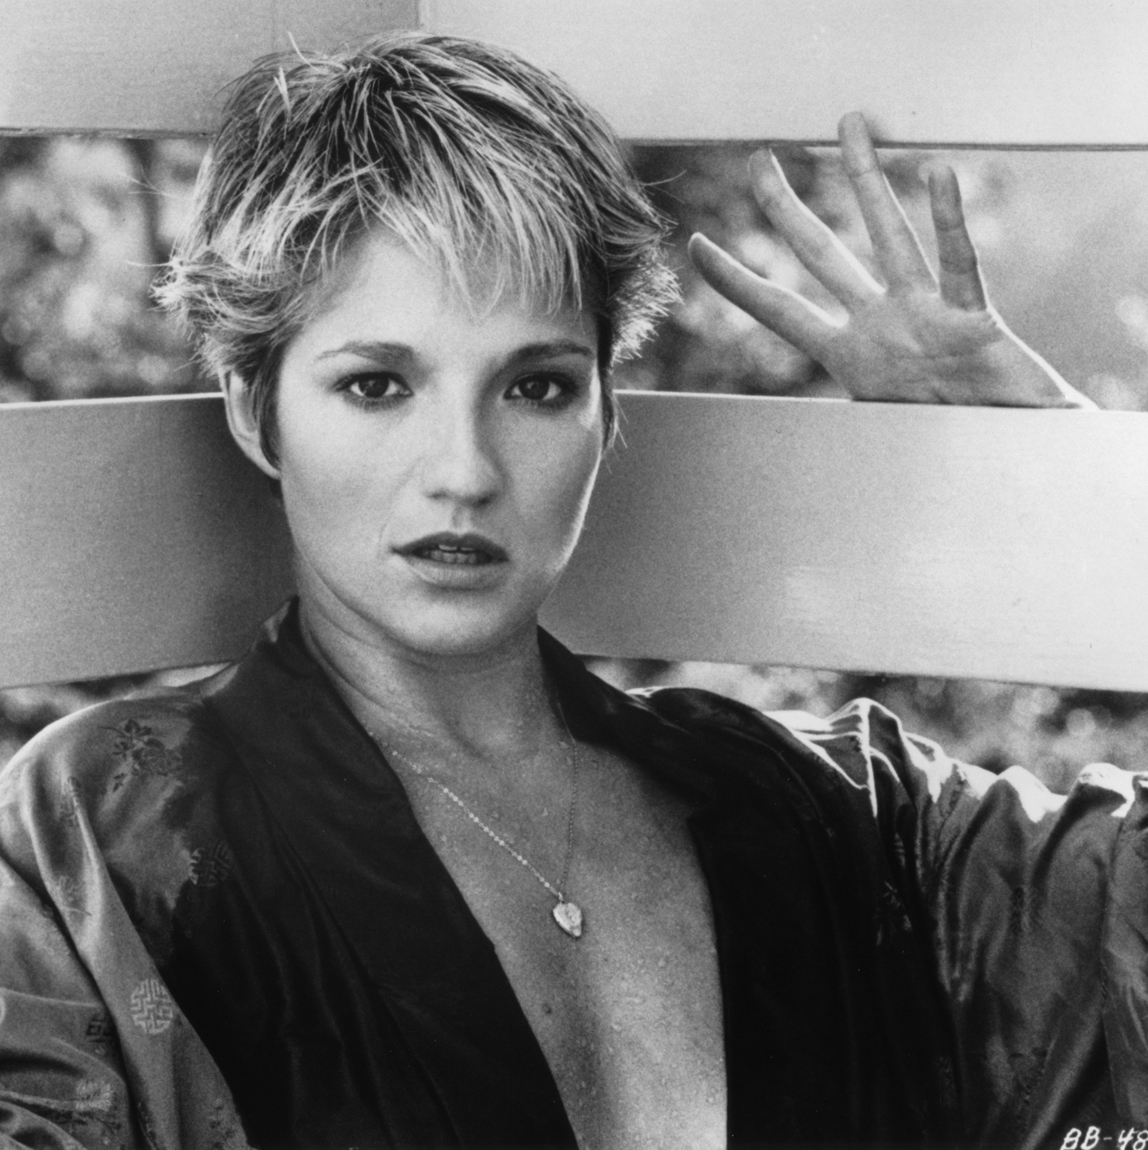 chrystelle mae angulo recommends ellen barkin sexy pic